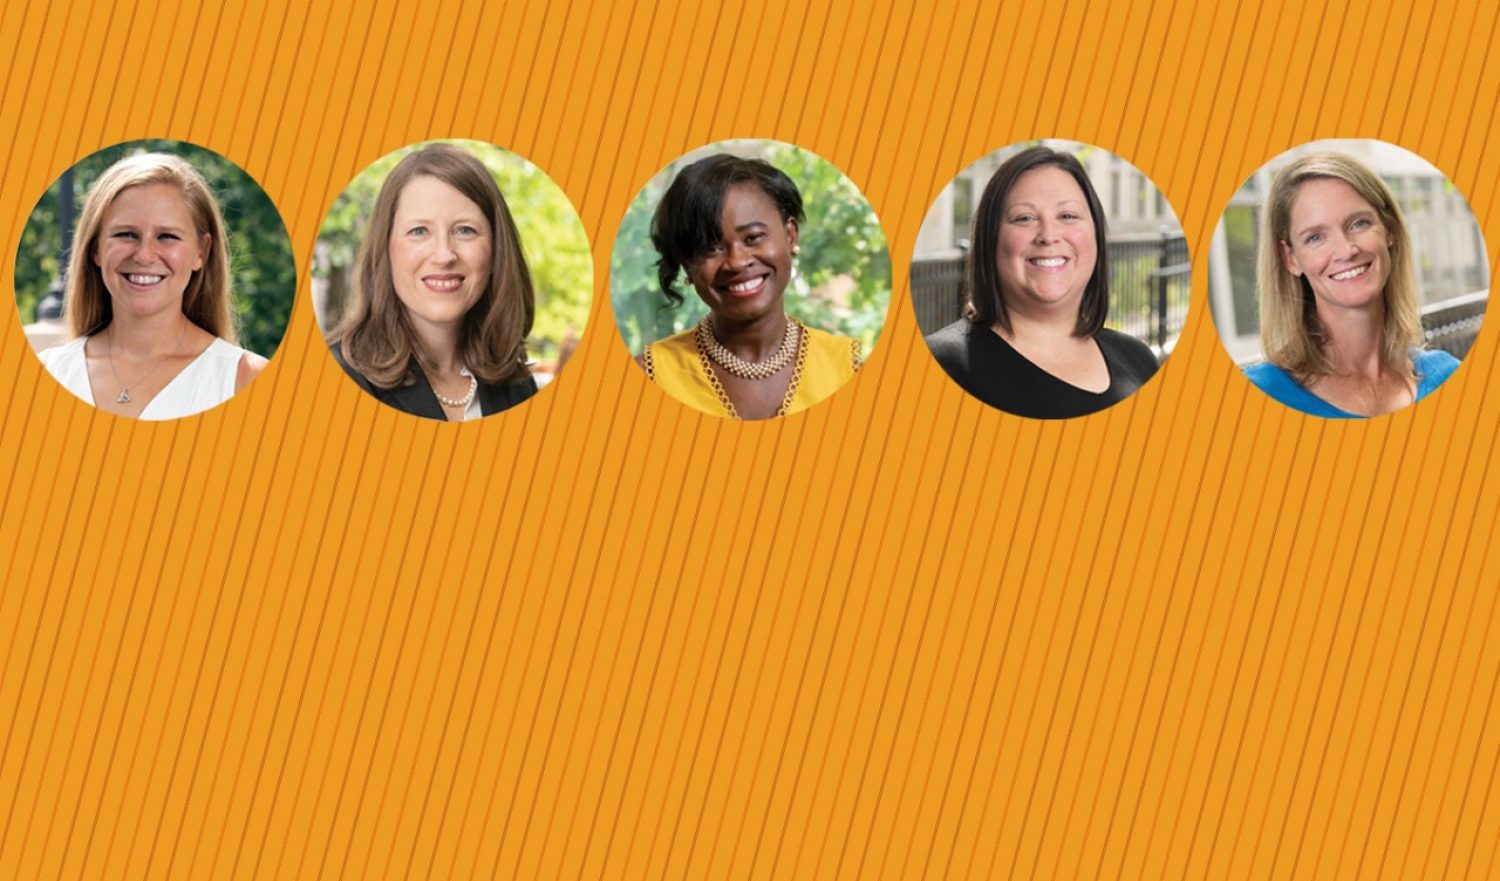 New faculty members Lindsey Horrell, Melissa Uveges, Cherlie Magny-Normilus, Erin Murphy-Swenson, and Patricia Underwood